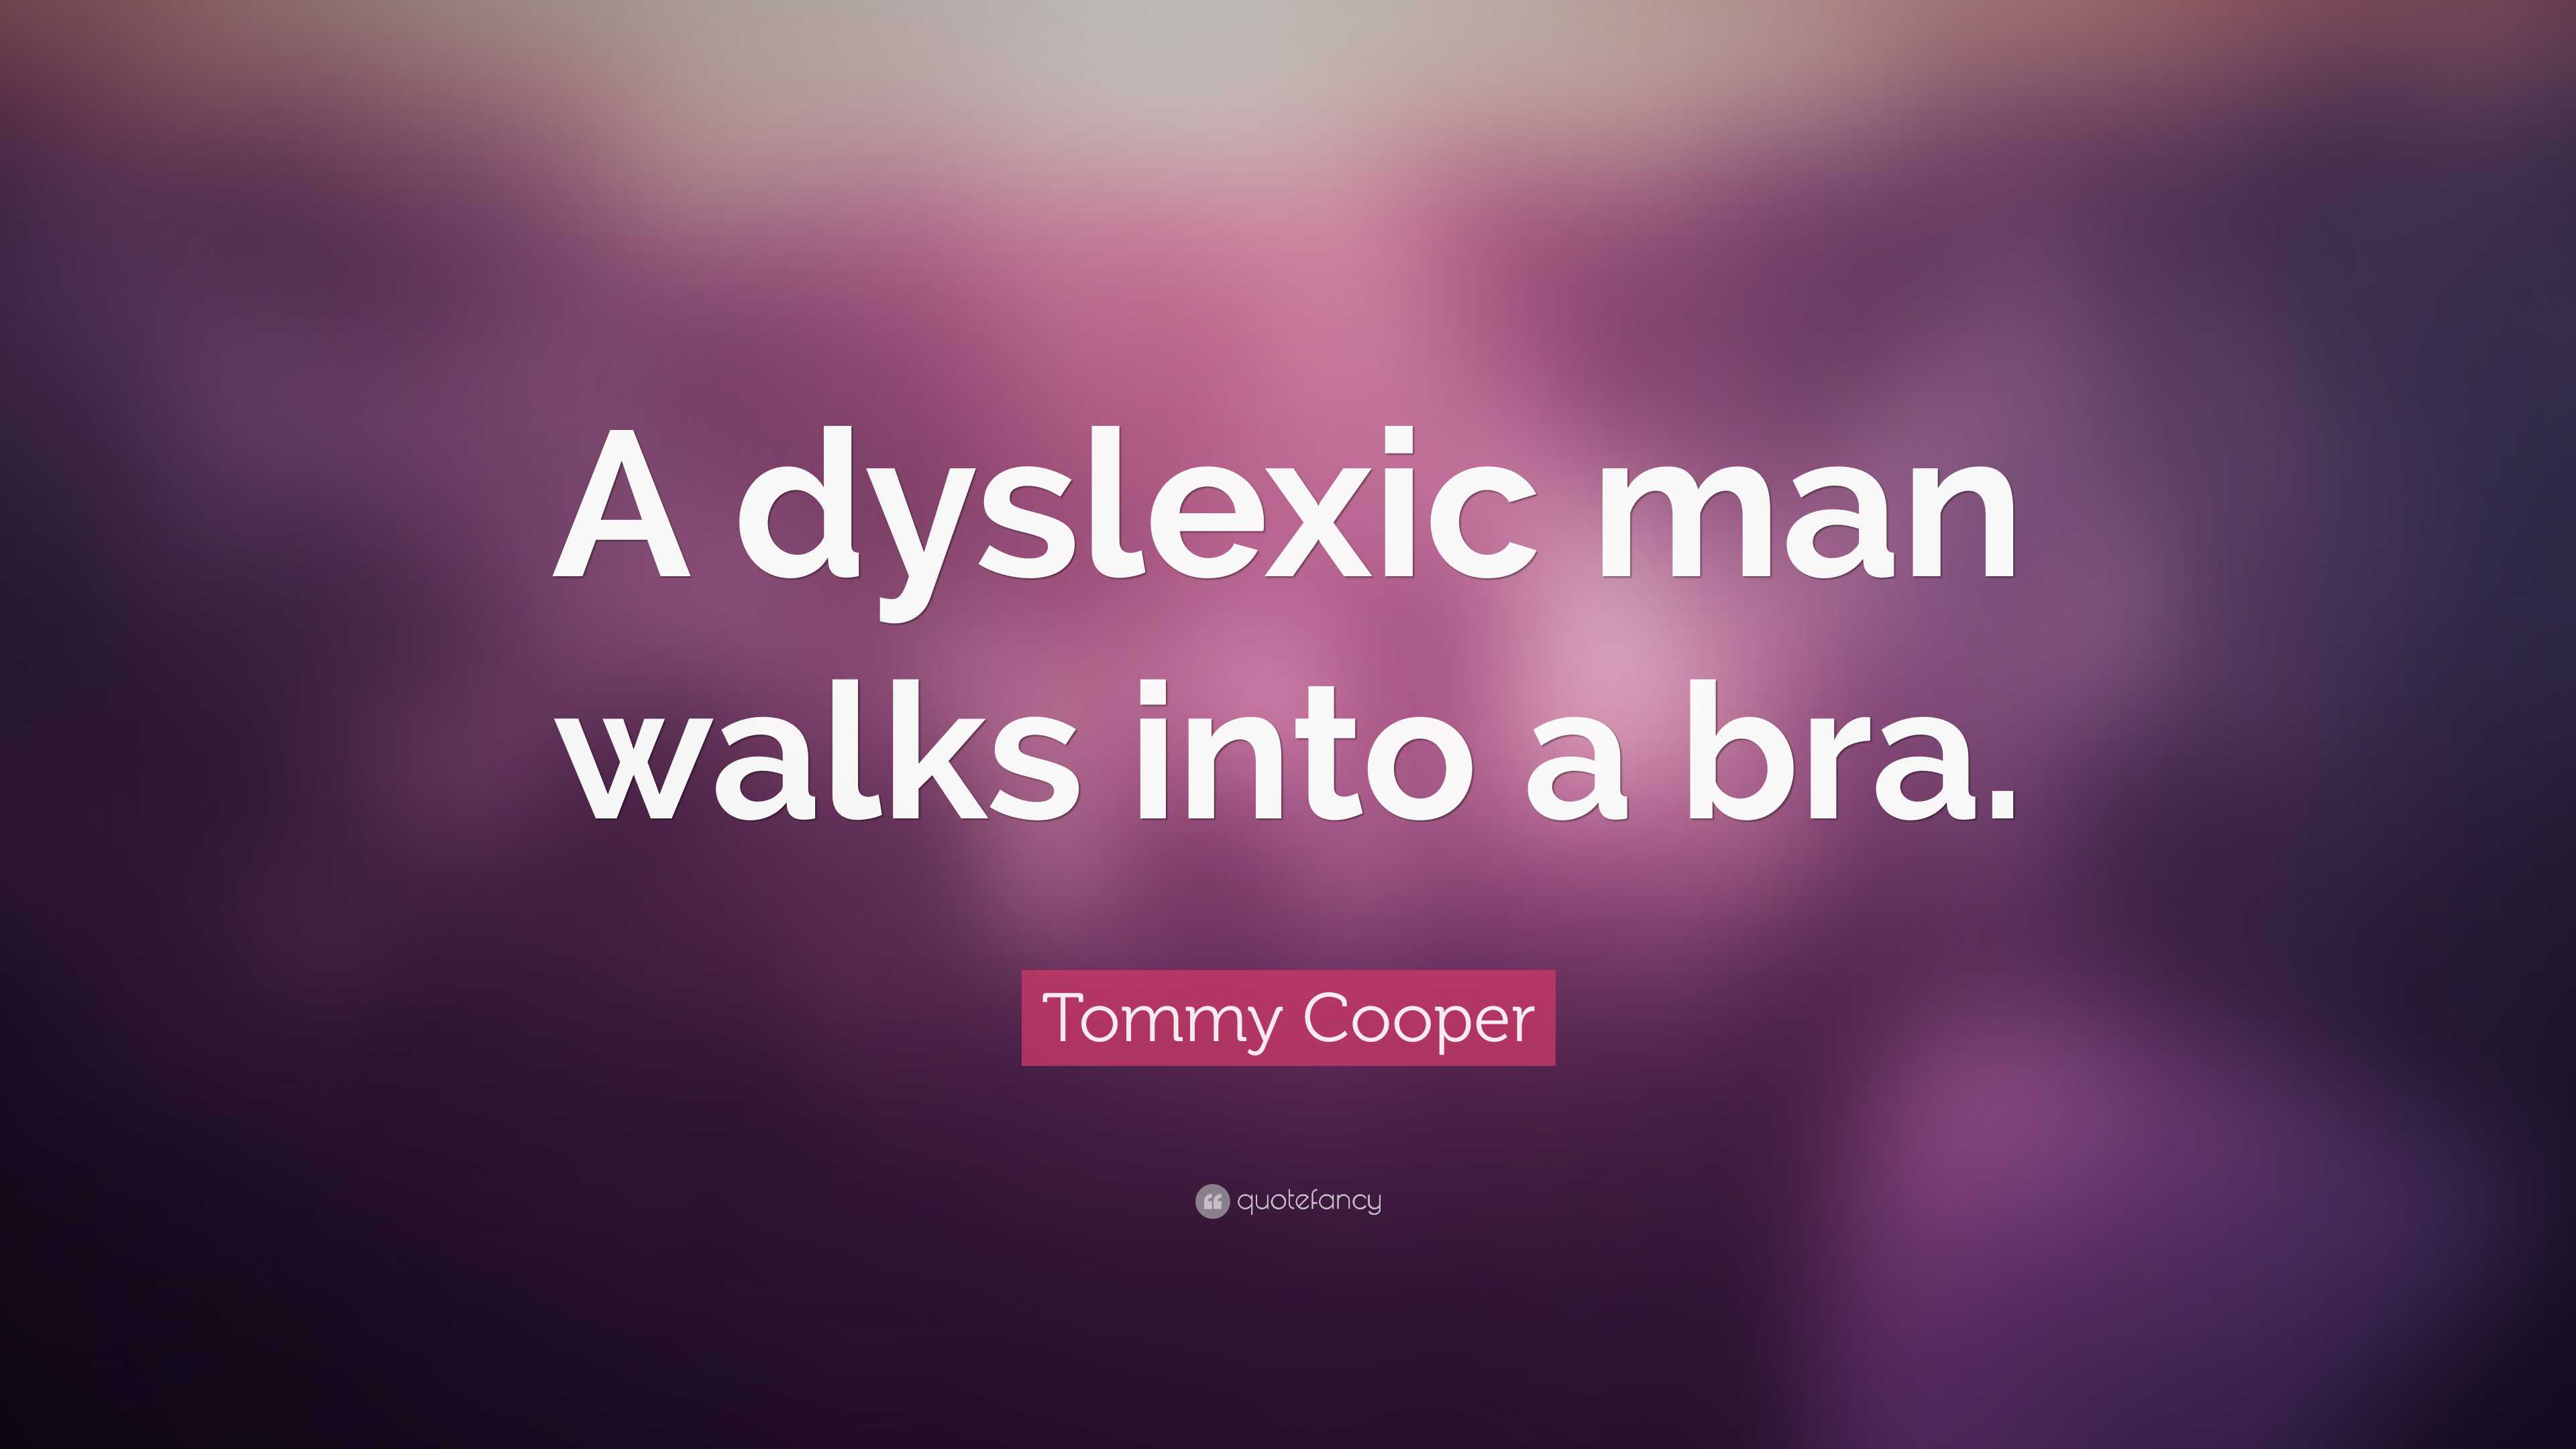  A Dyslexic Walks Into a Bra: A compendium of the best